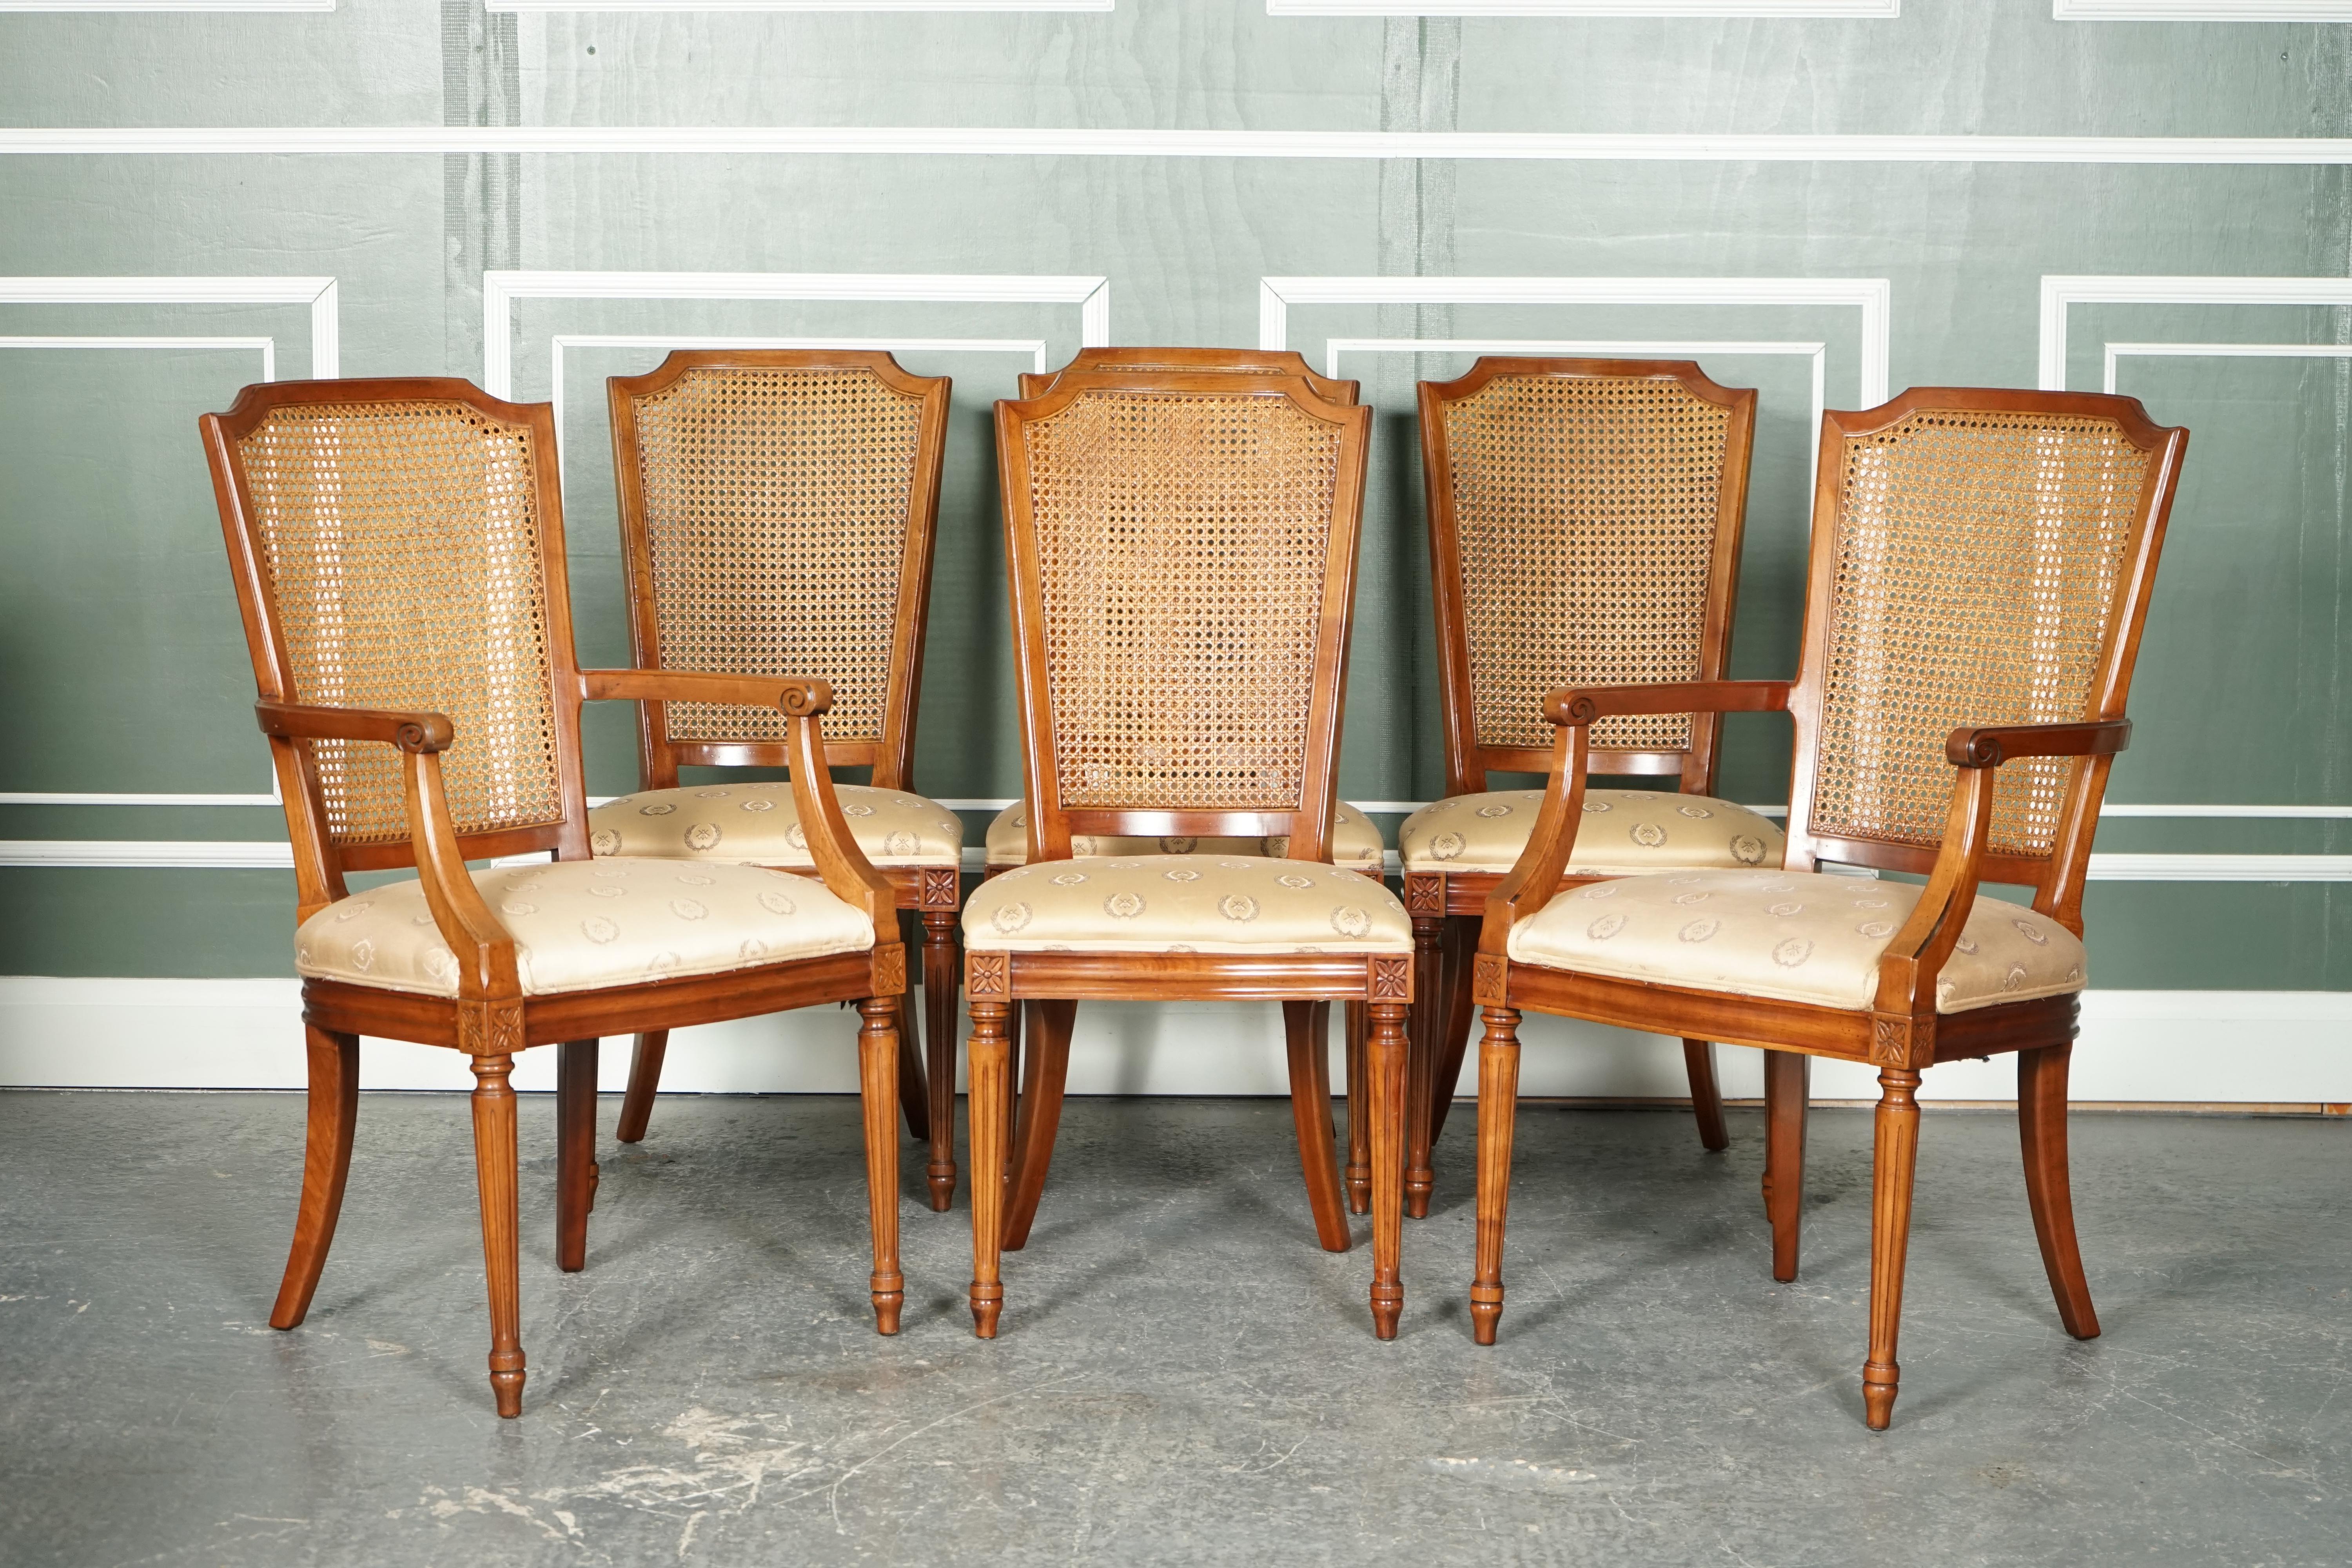 LOVELY SET OF 6 WALNUT BANDED WITH BERGERE BACKS DINING CHAIRS MADE BY KiNDEL 9